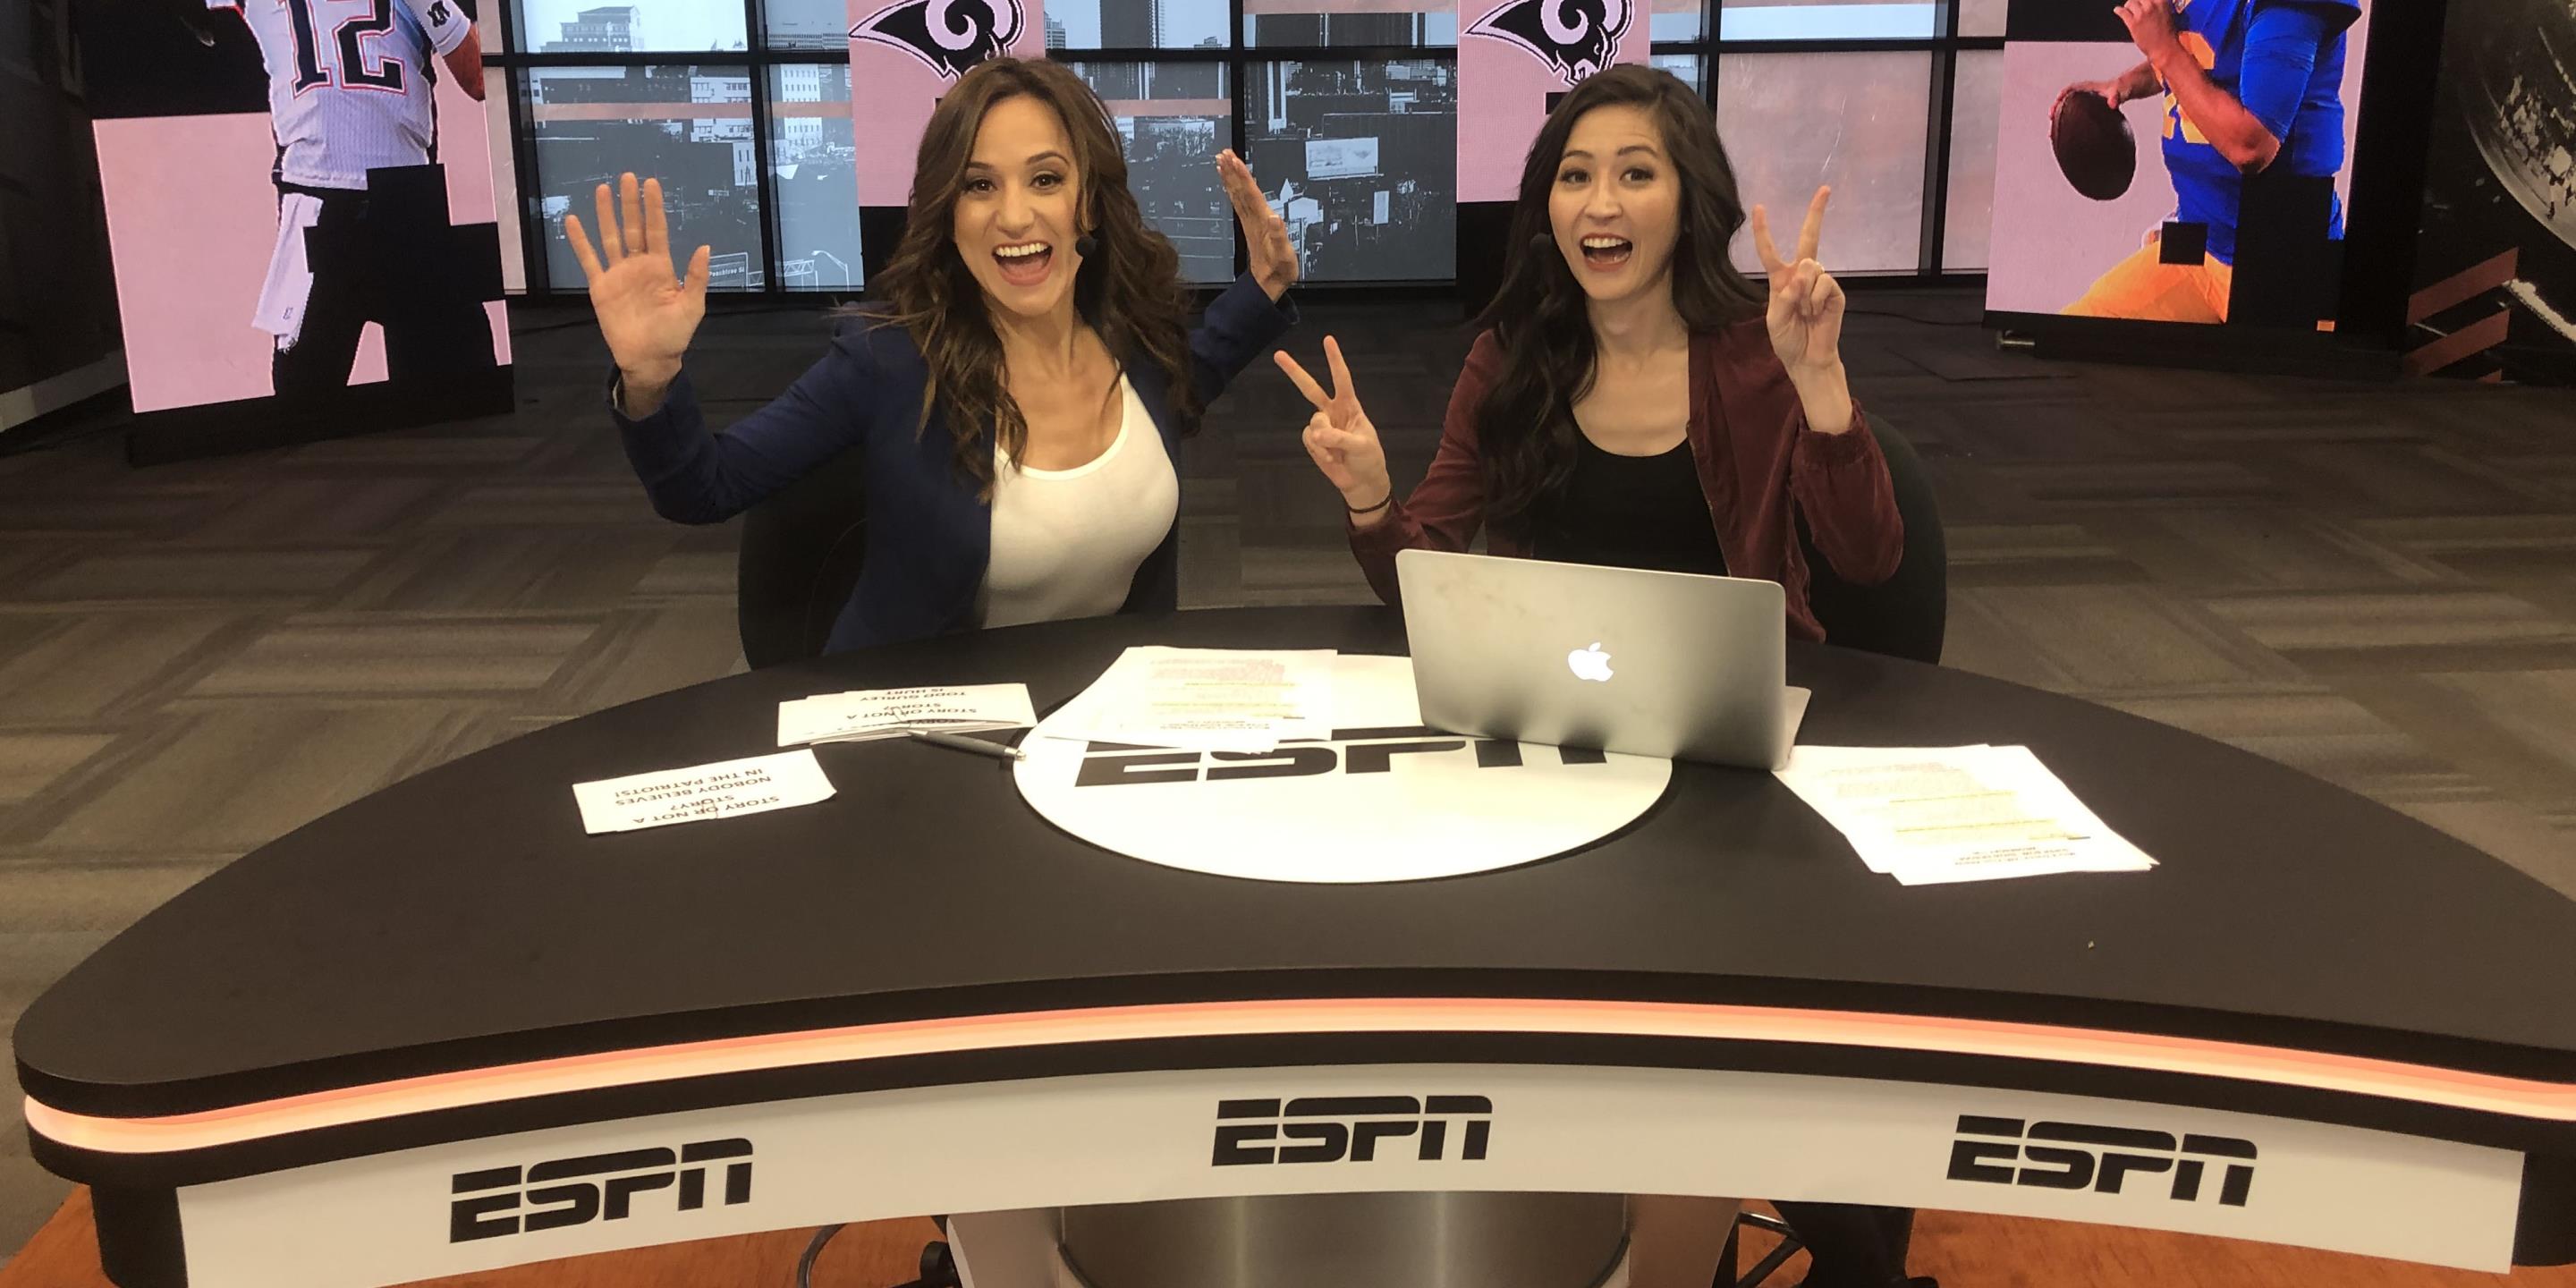 The millennial voices of ESPN - Furthermore2880 x 1440